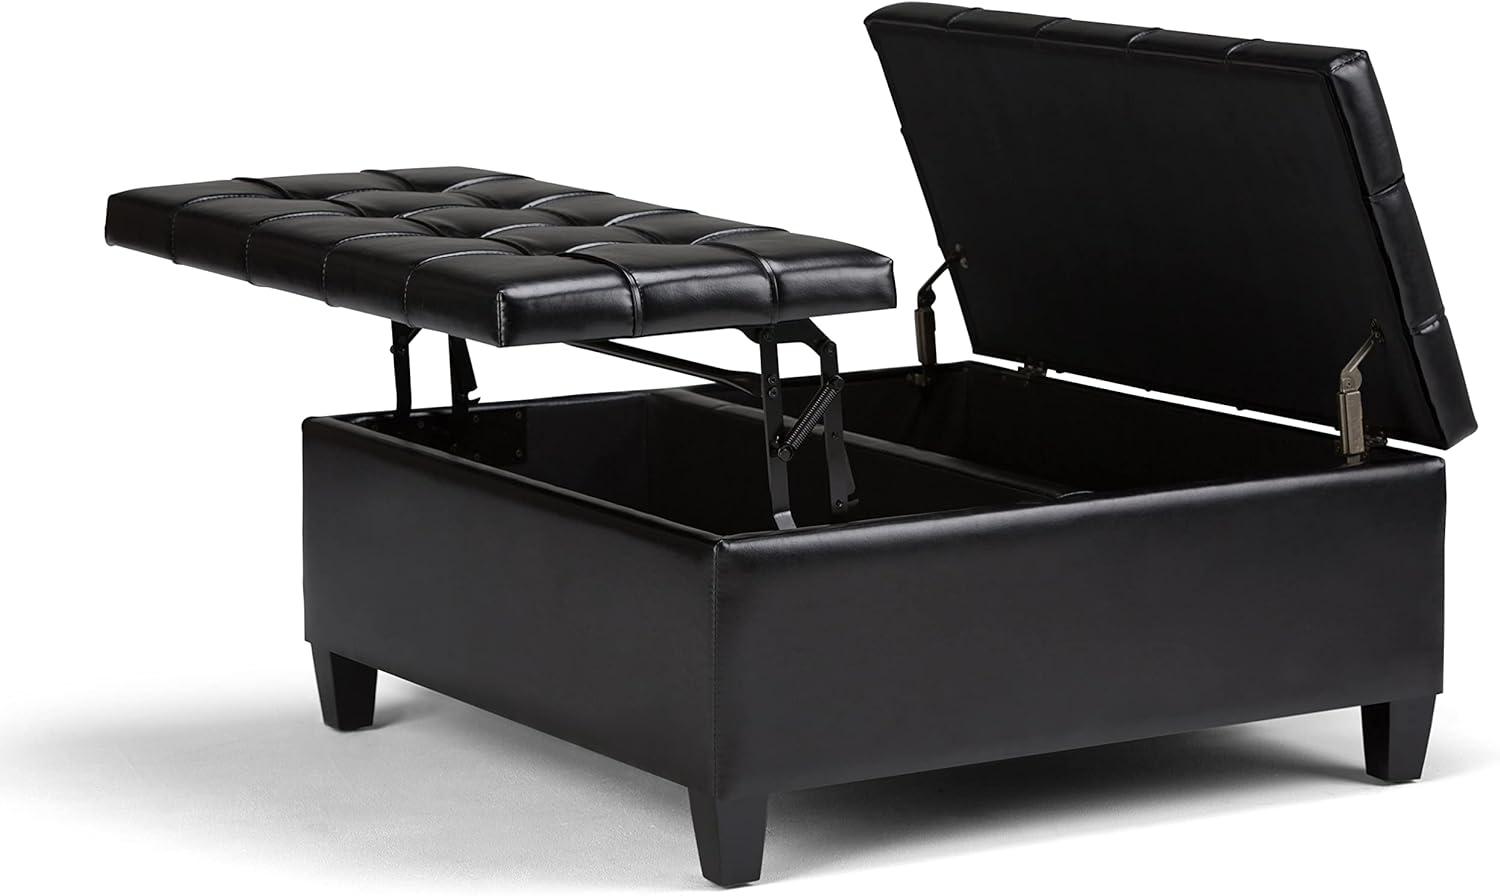 Midnight Black Tufted Faux Leather 36" Square Storage Ottoman